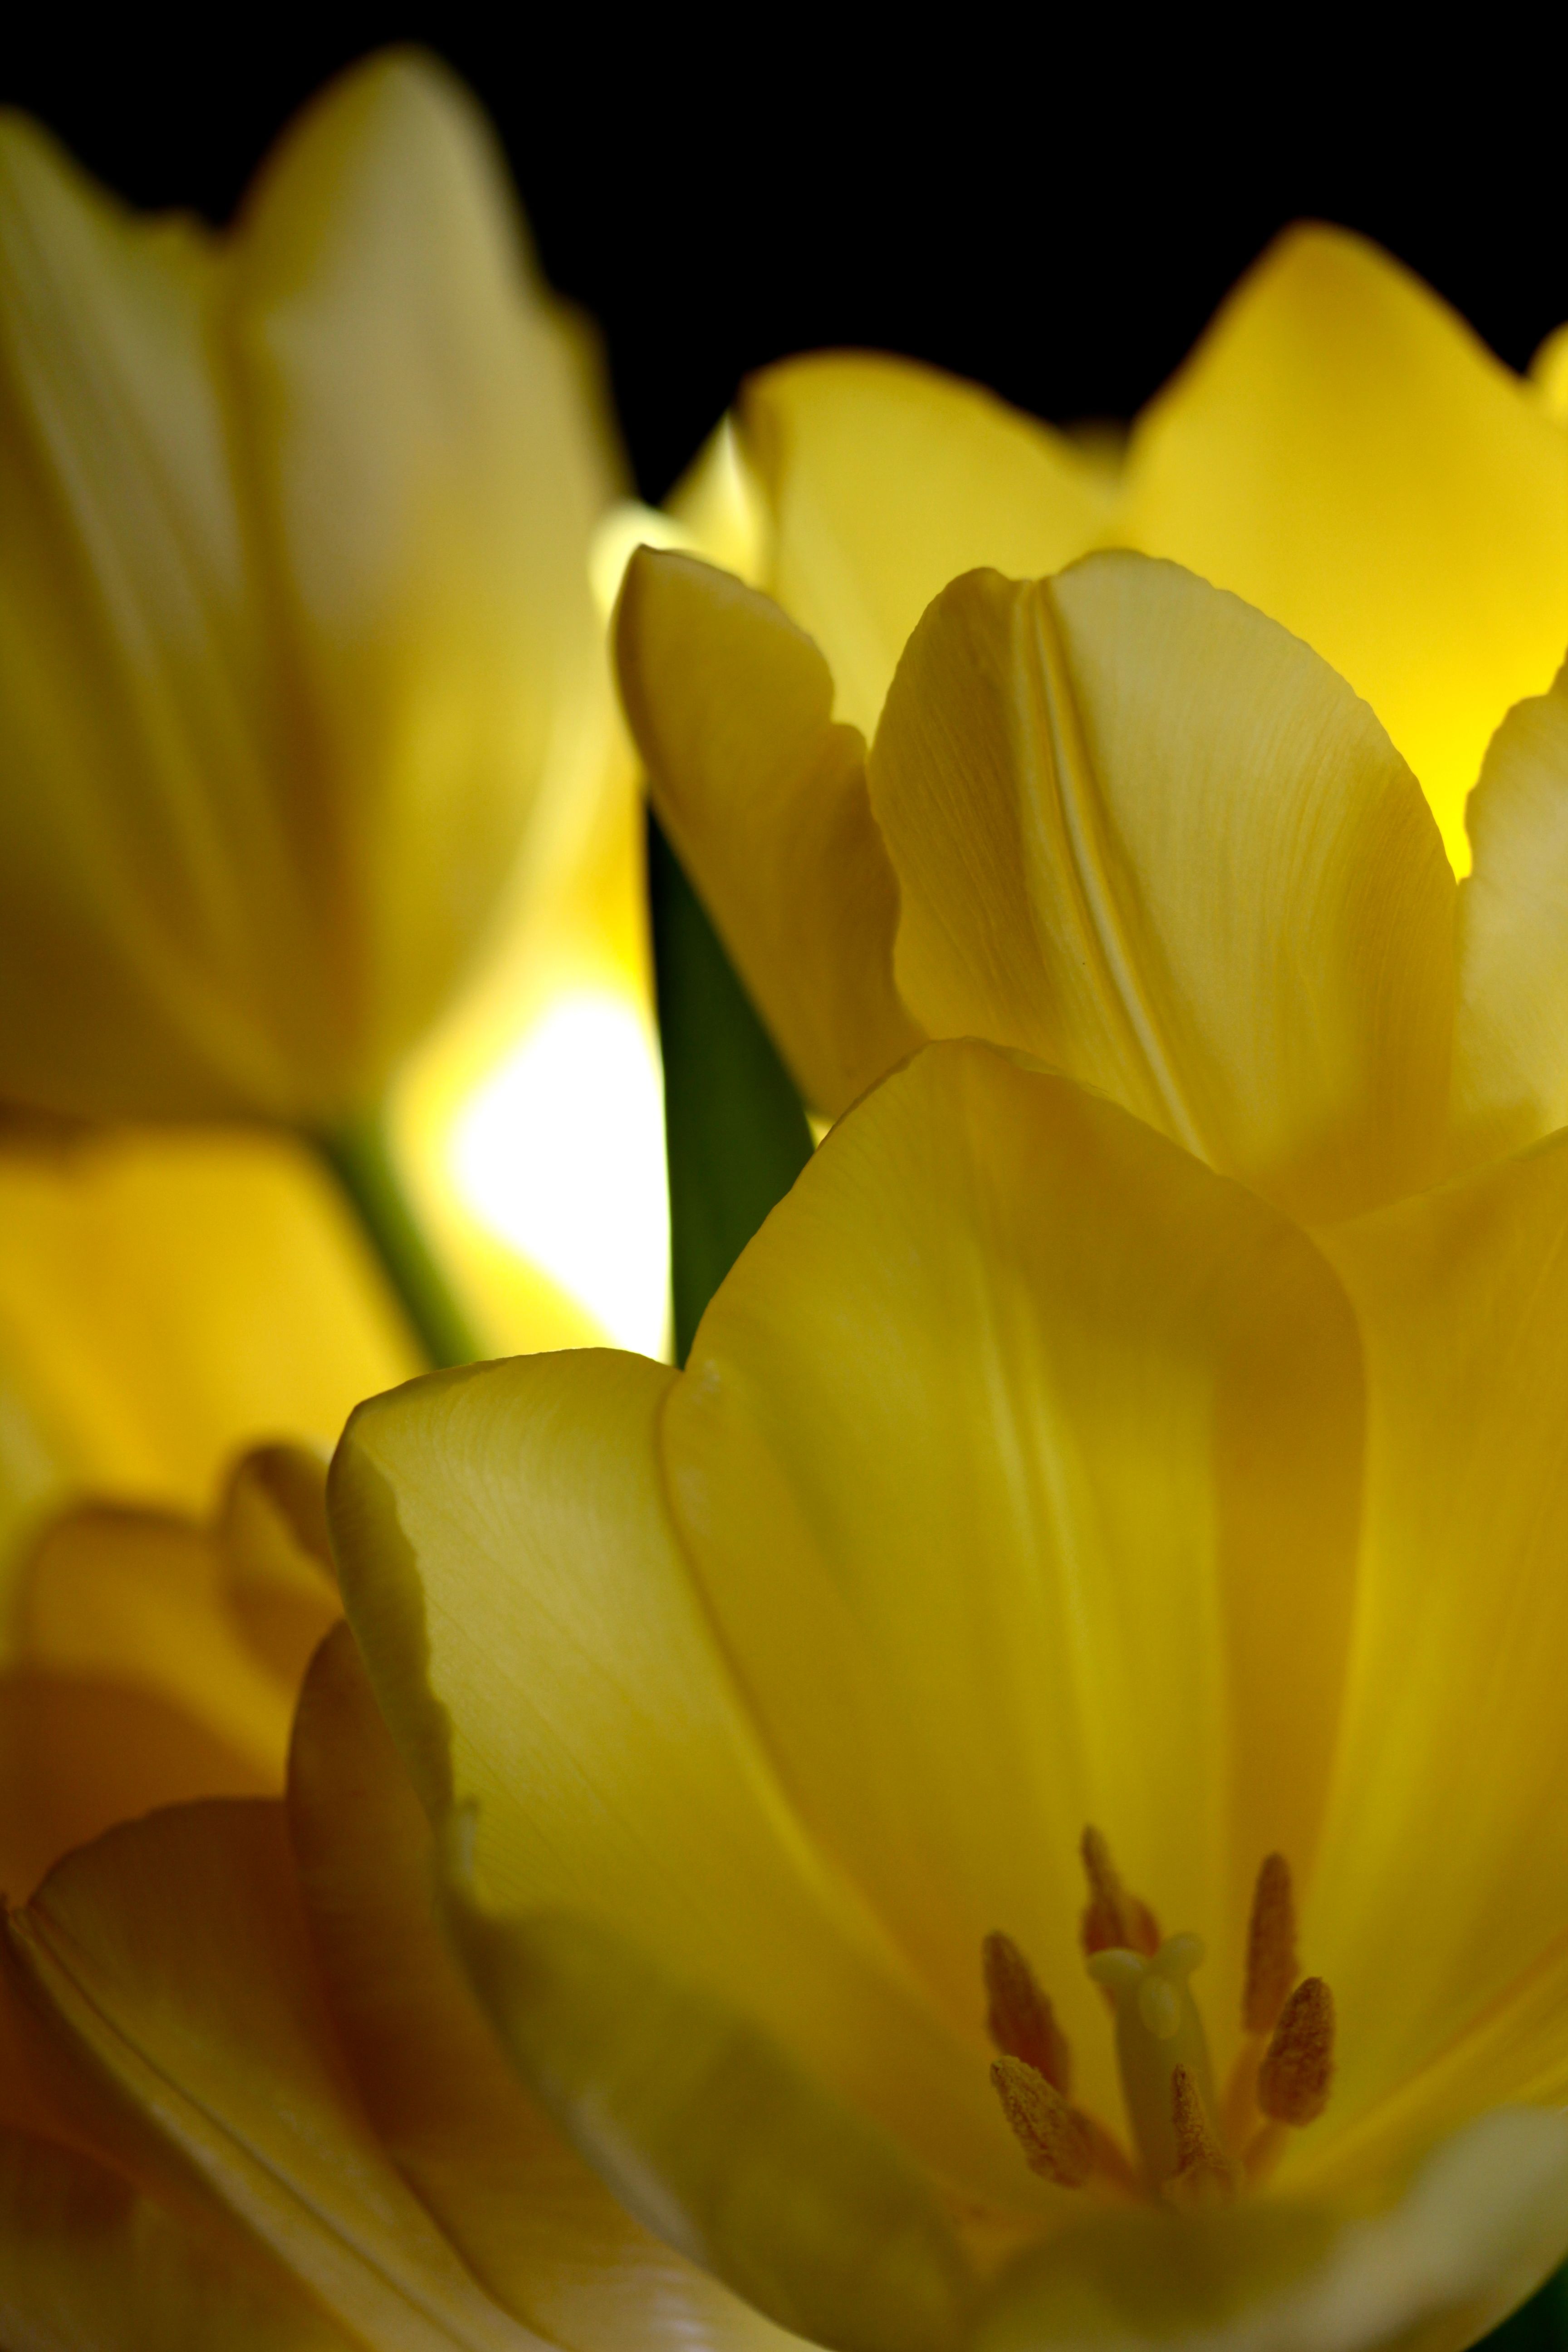 Beauty shot: layers of silky petals, shining bright sunshine from their hearts.